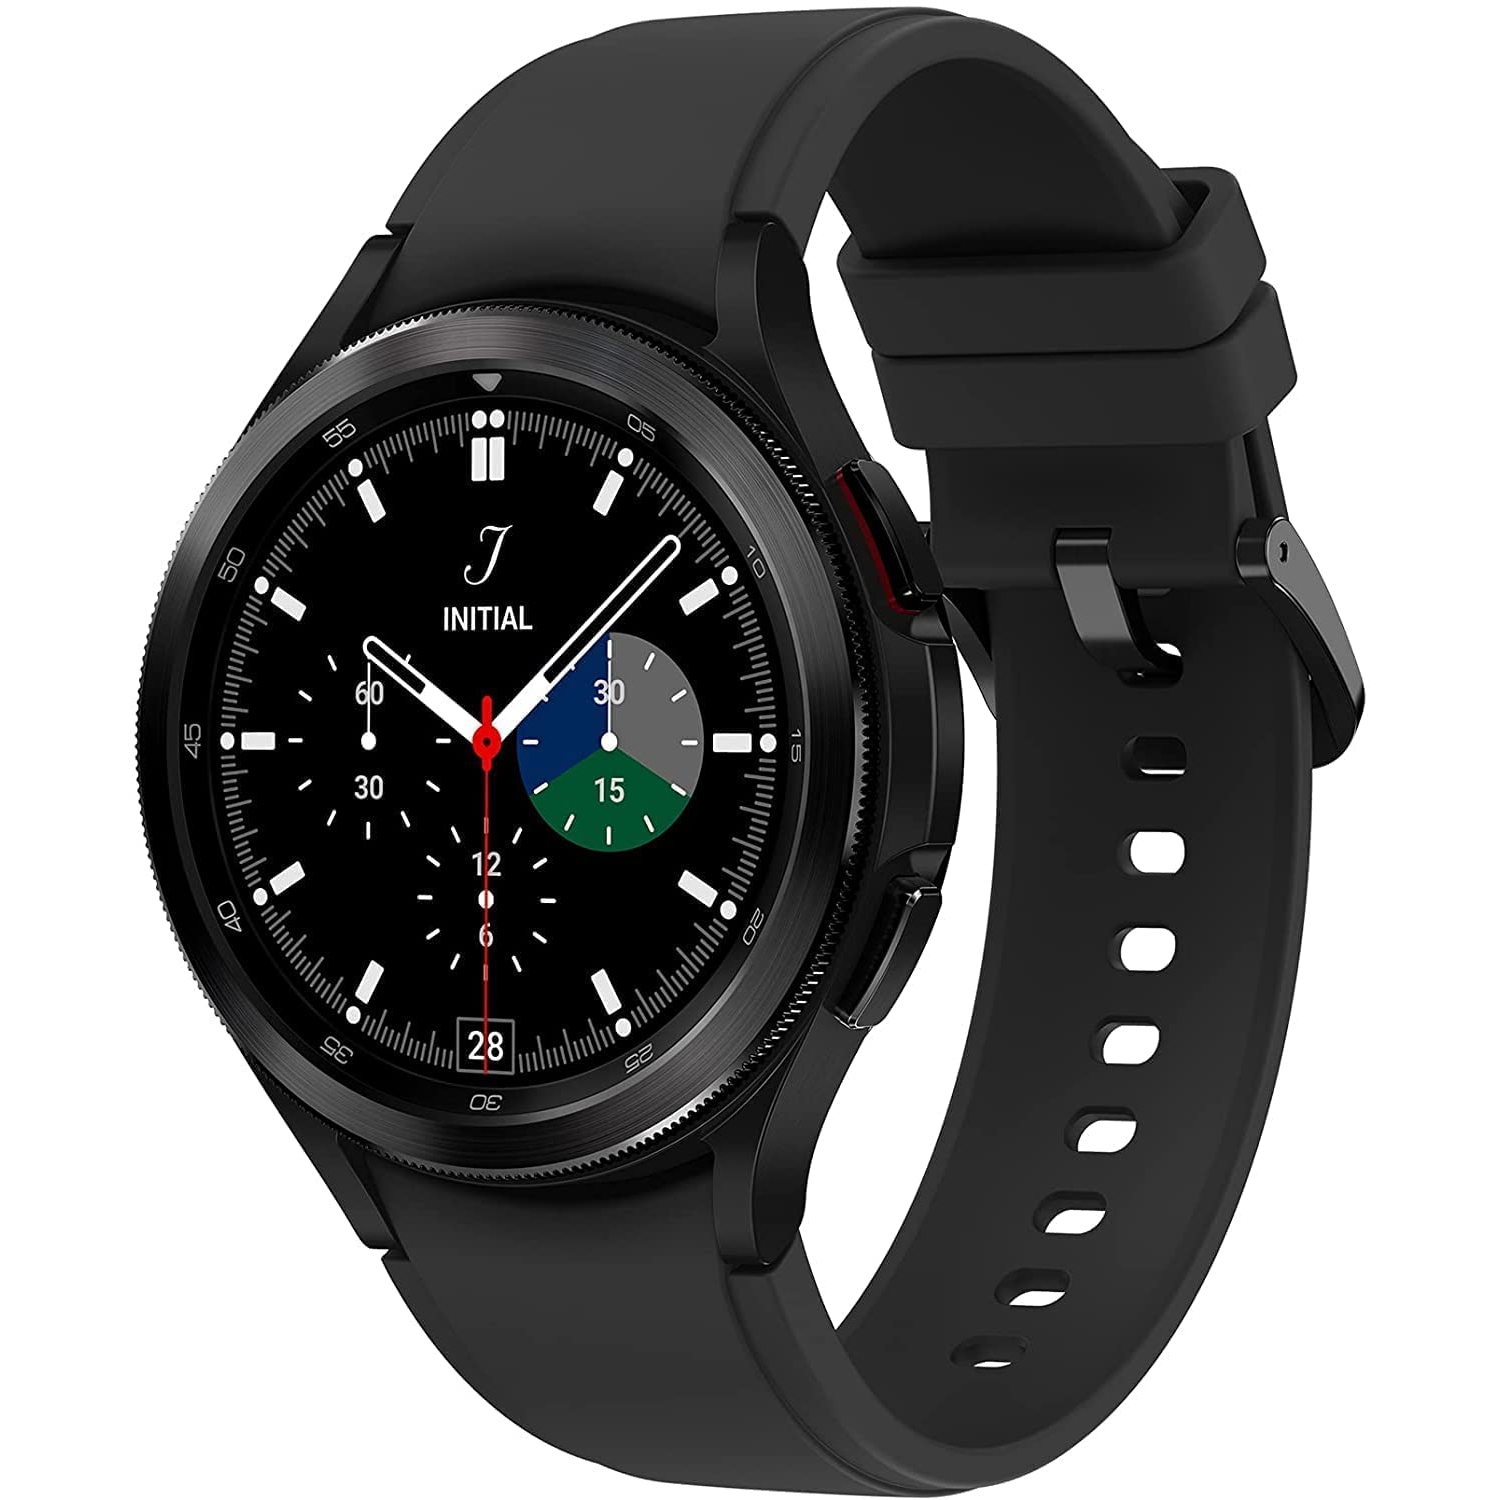 Refurbished (Excellent) - Samsung Galaxy Watch4 Classic 46mm (LTE) Smartwatch with Heart Rate Monitor - Black